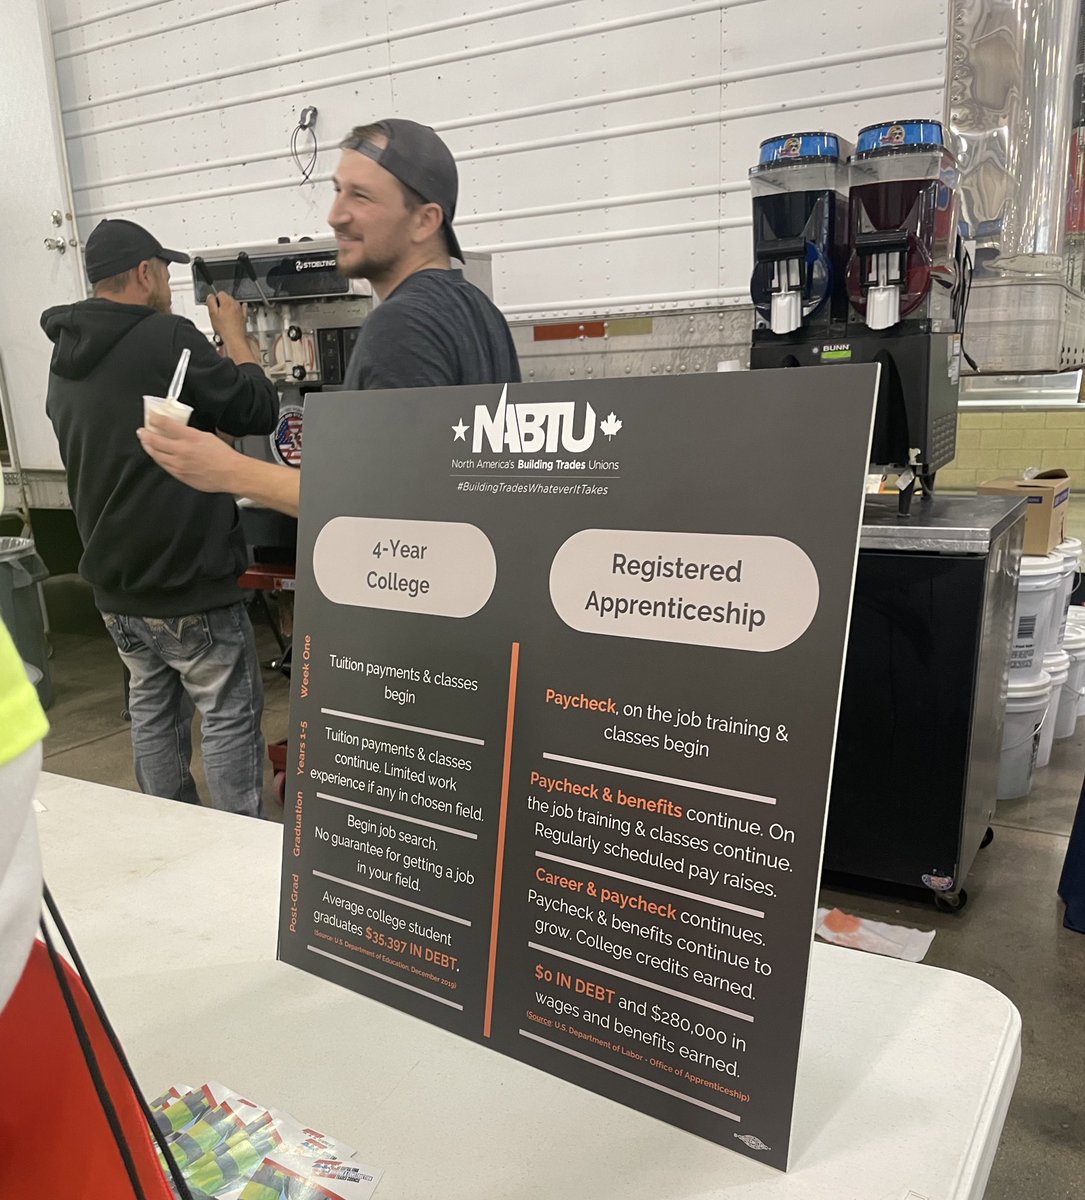 When the union apprenticeship vs. college signage is strategically placed where the ice cream is at 🍦👌

#iowaconstruction #iowaskilledtrades @nabtu #BuildMyFuture